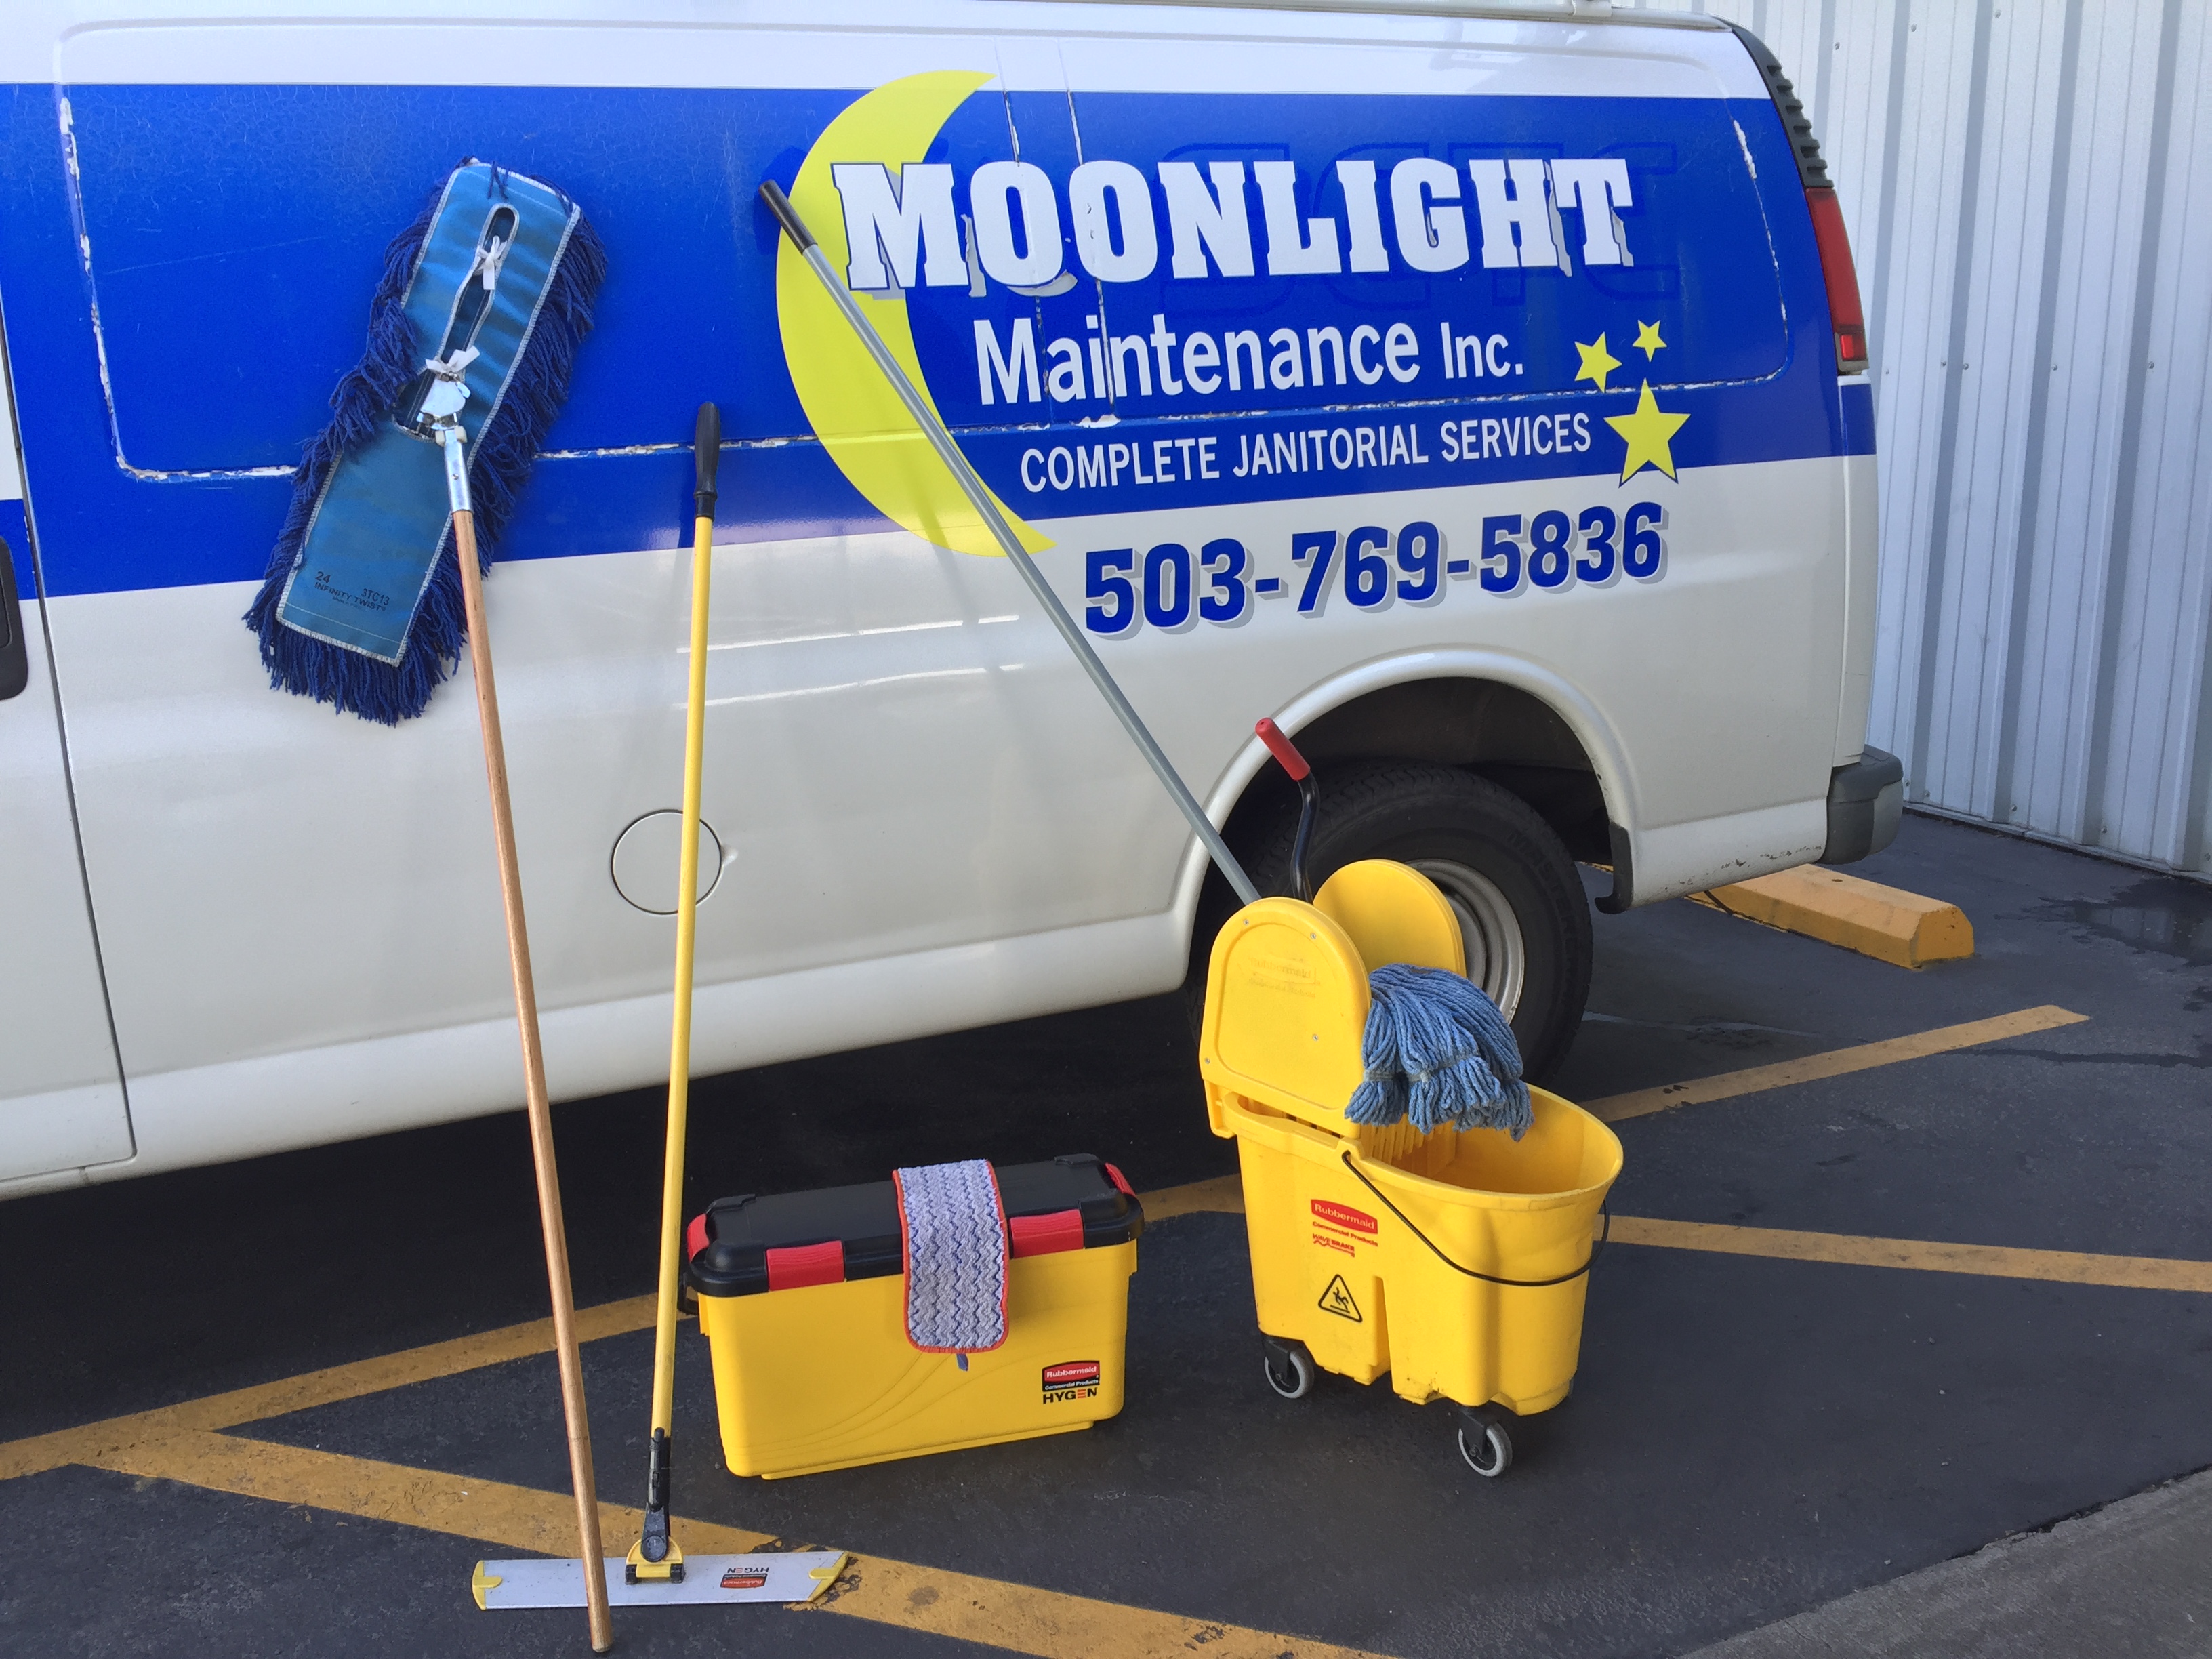 moonlight maintenance,janitorial service,commercial cleaning,residential cleaning